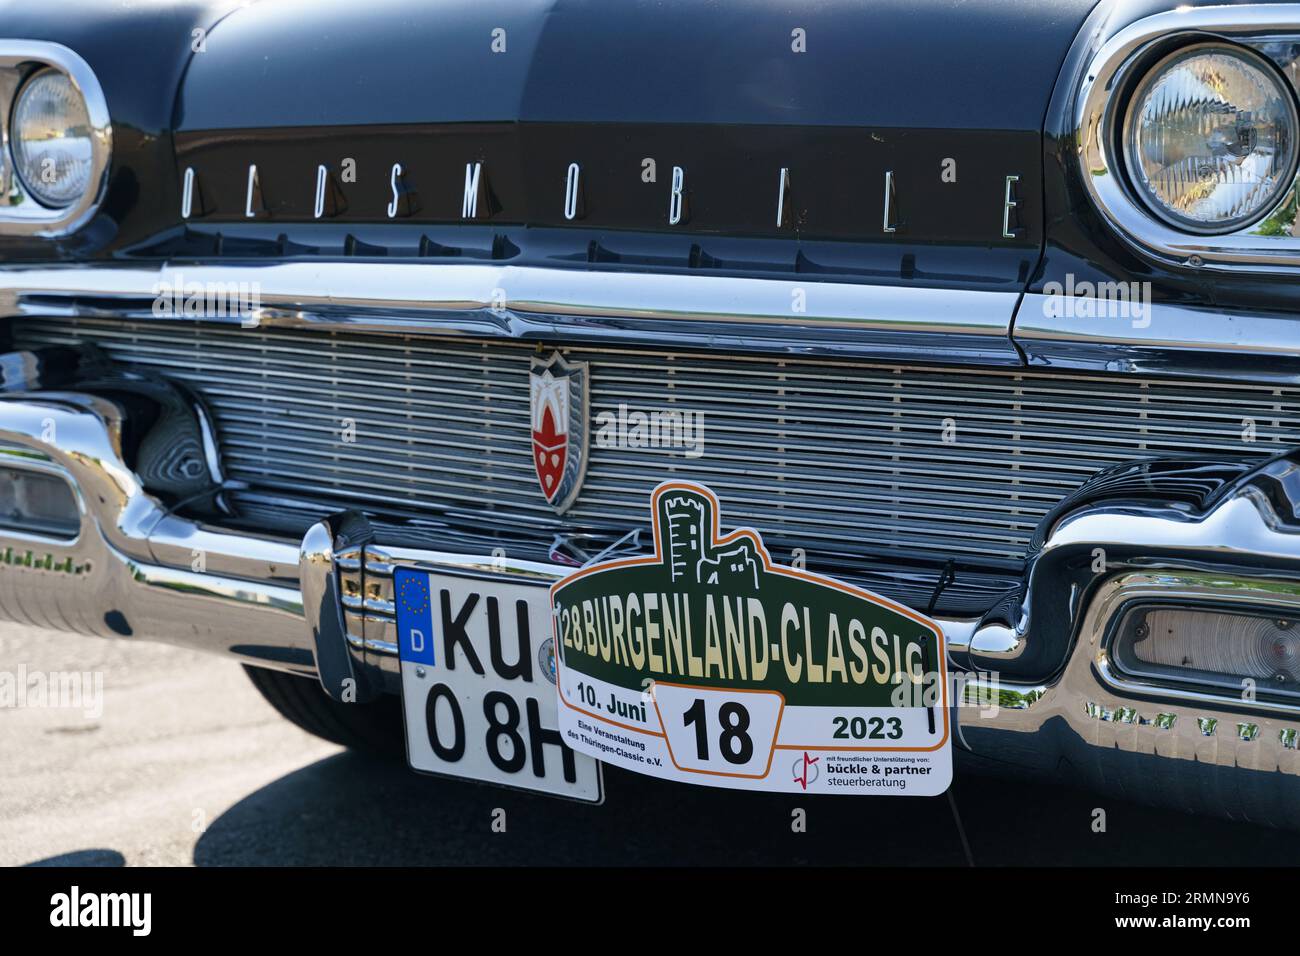 Waltershausen, Germany - June 10, 2023: A vintage American Oldsmobile Rocket Super 88 is parked in front of a Burgenland classic. Front view of headli Stock Photo